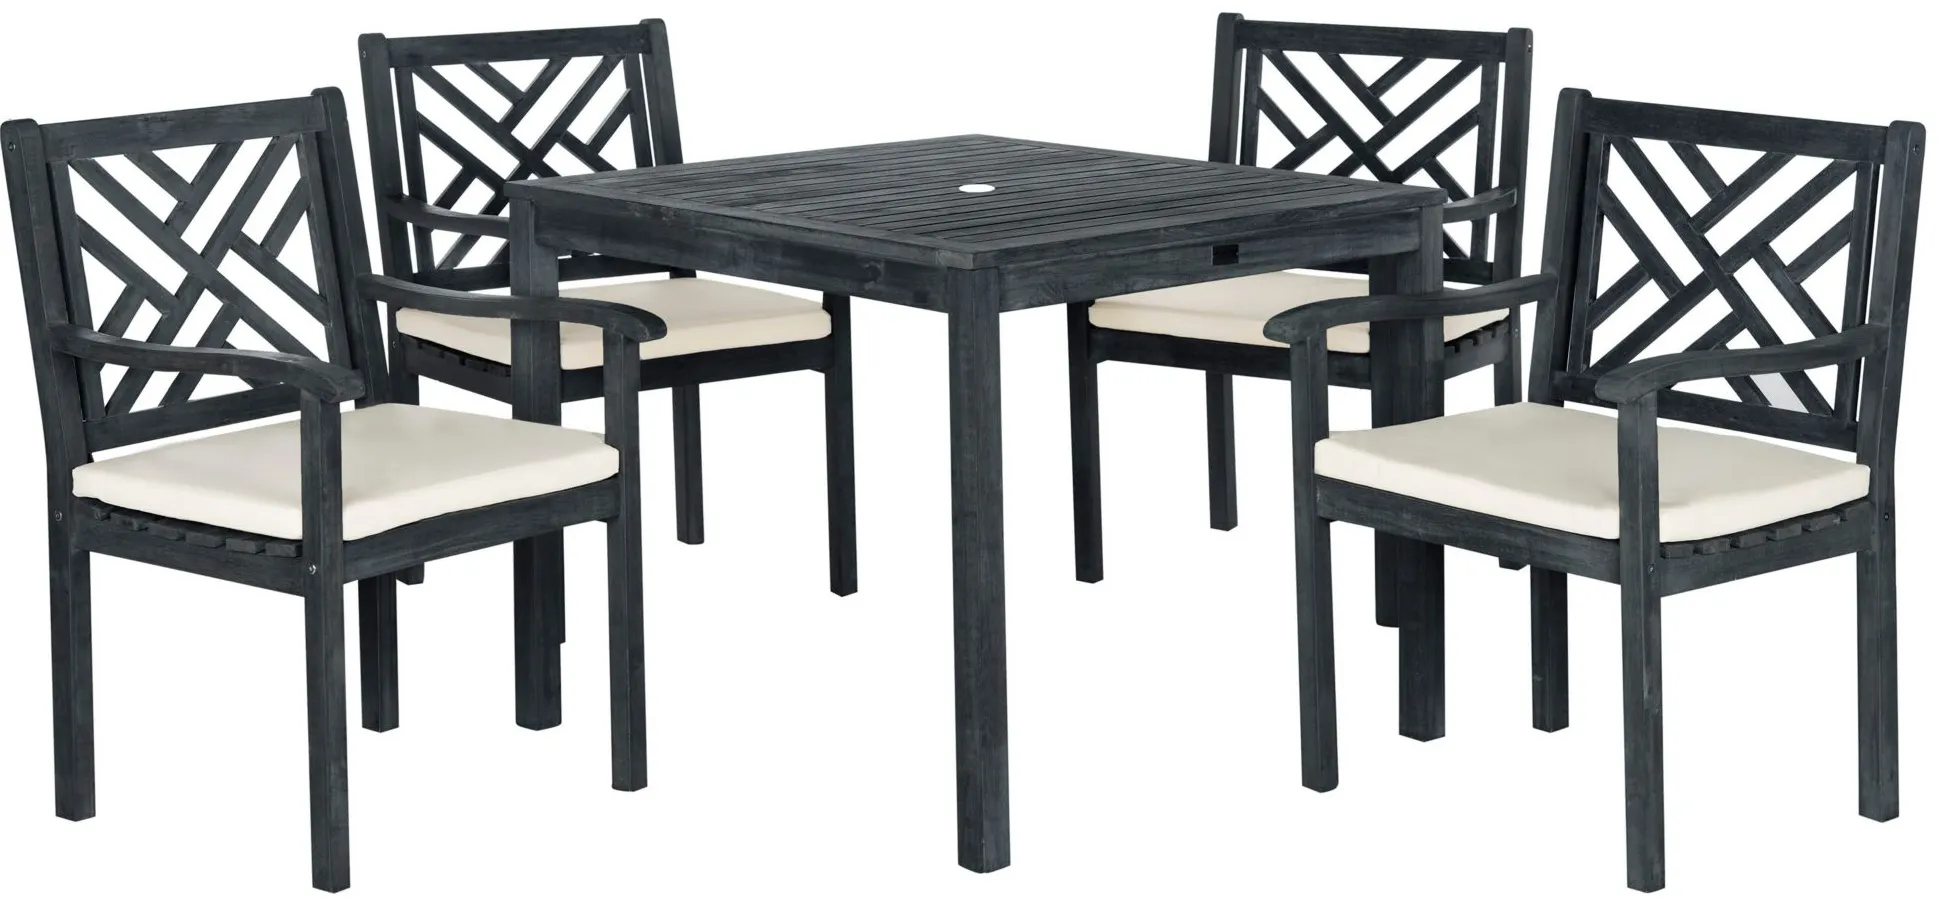 Kaylee 5-pc. Outdoor Dining Set in Bright Red by Safavieh